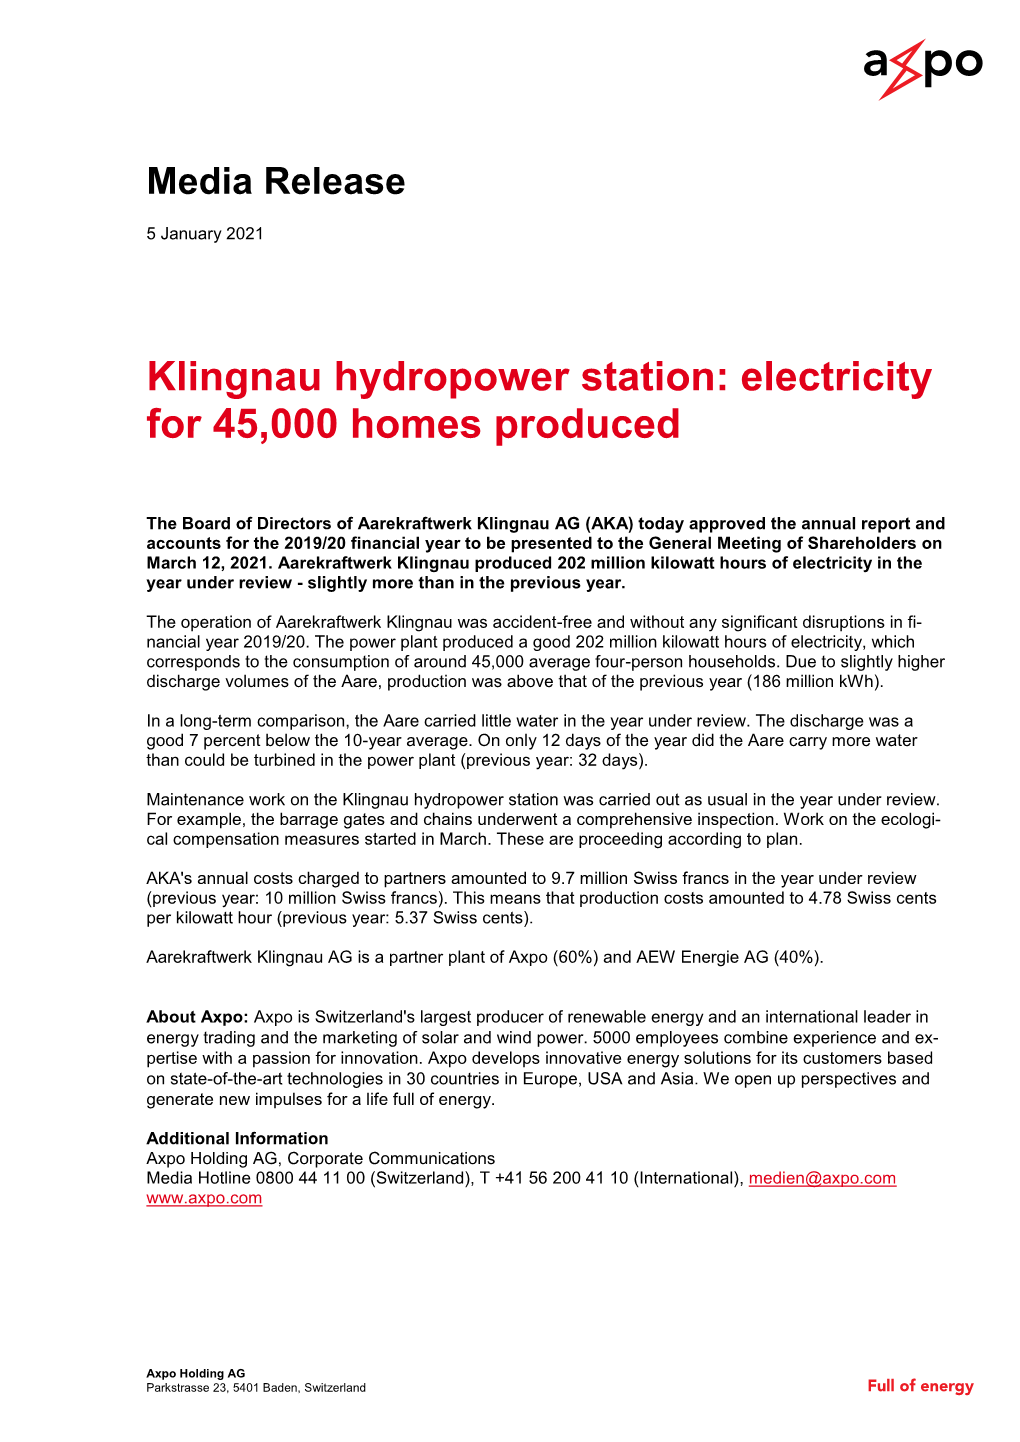 Klingnau Hydropower Station: Electricity for 45,000 Homes Produced